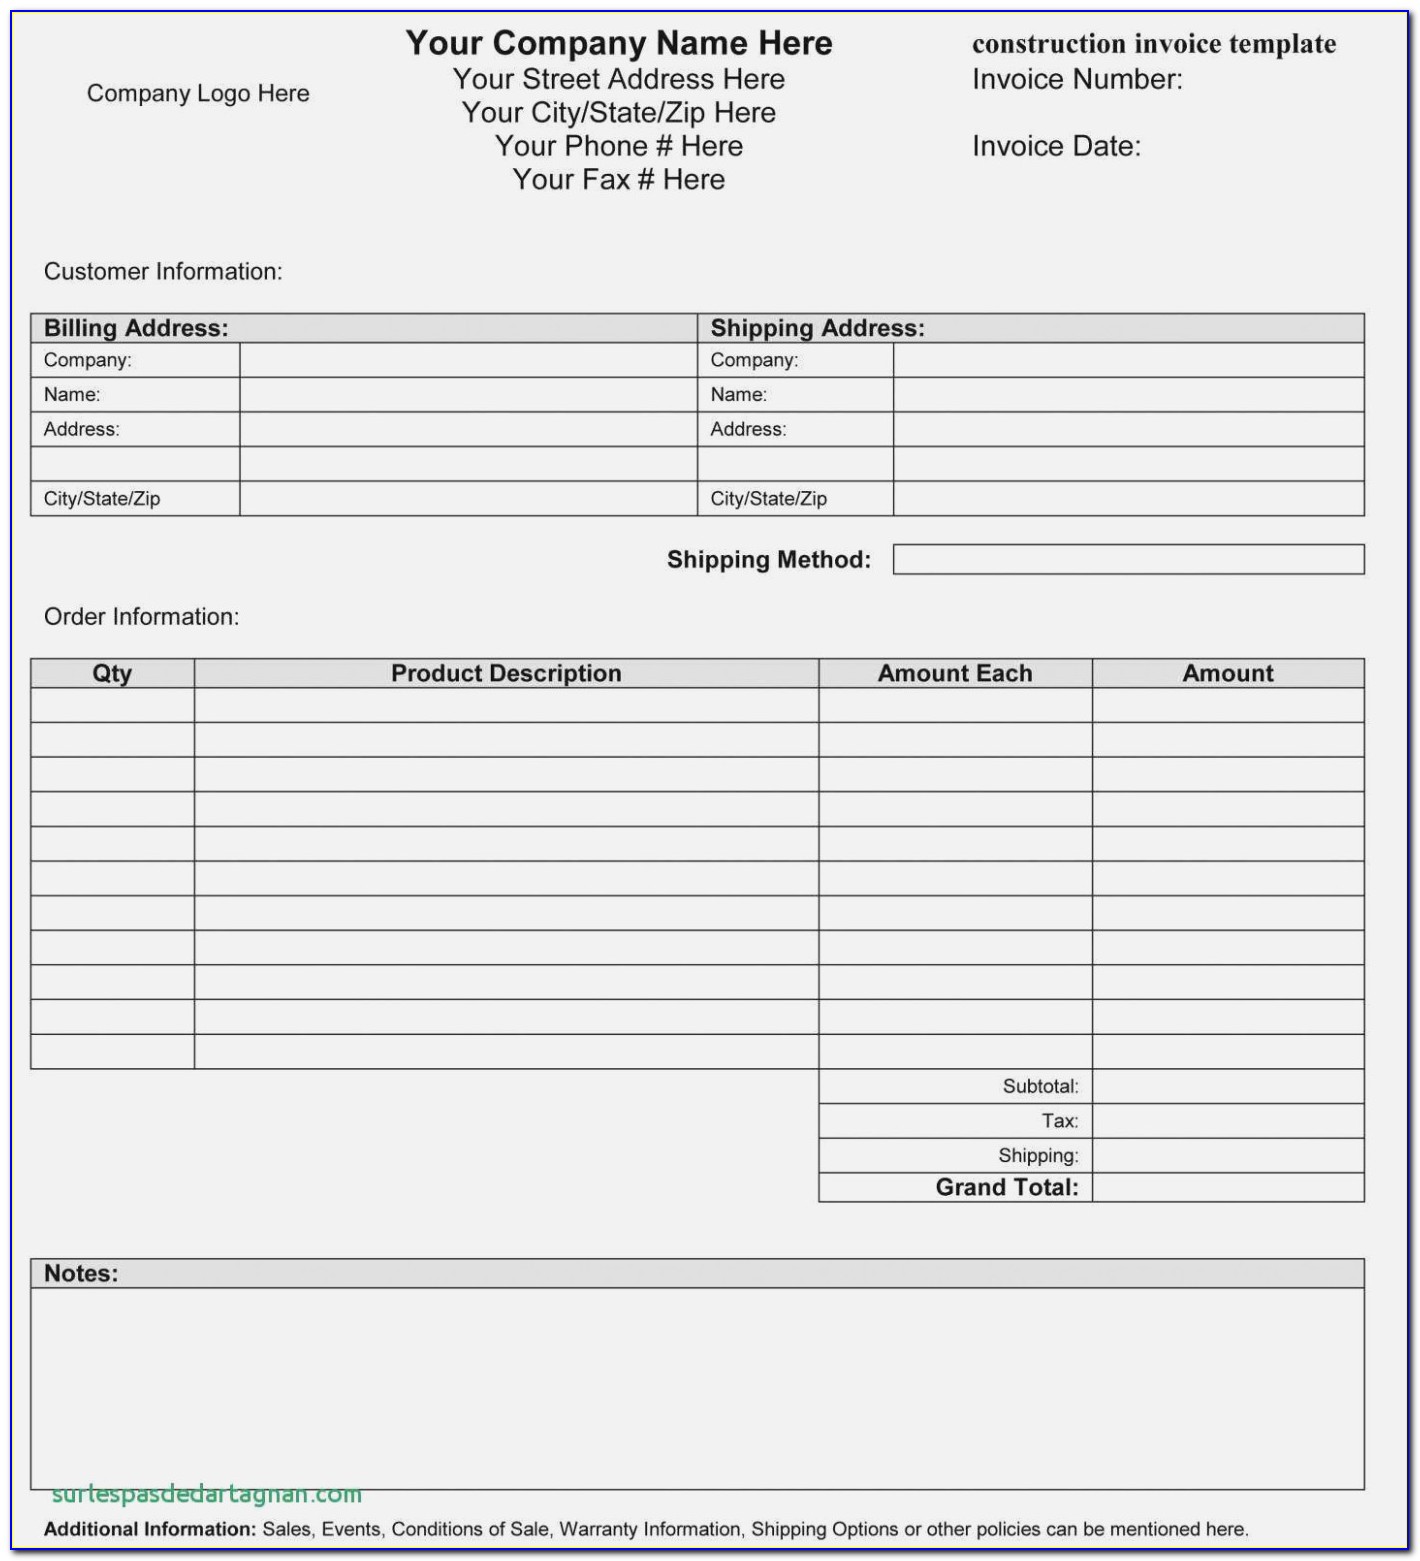 Construction Subcontractor Agreement Word Template